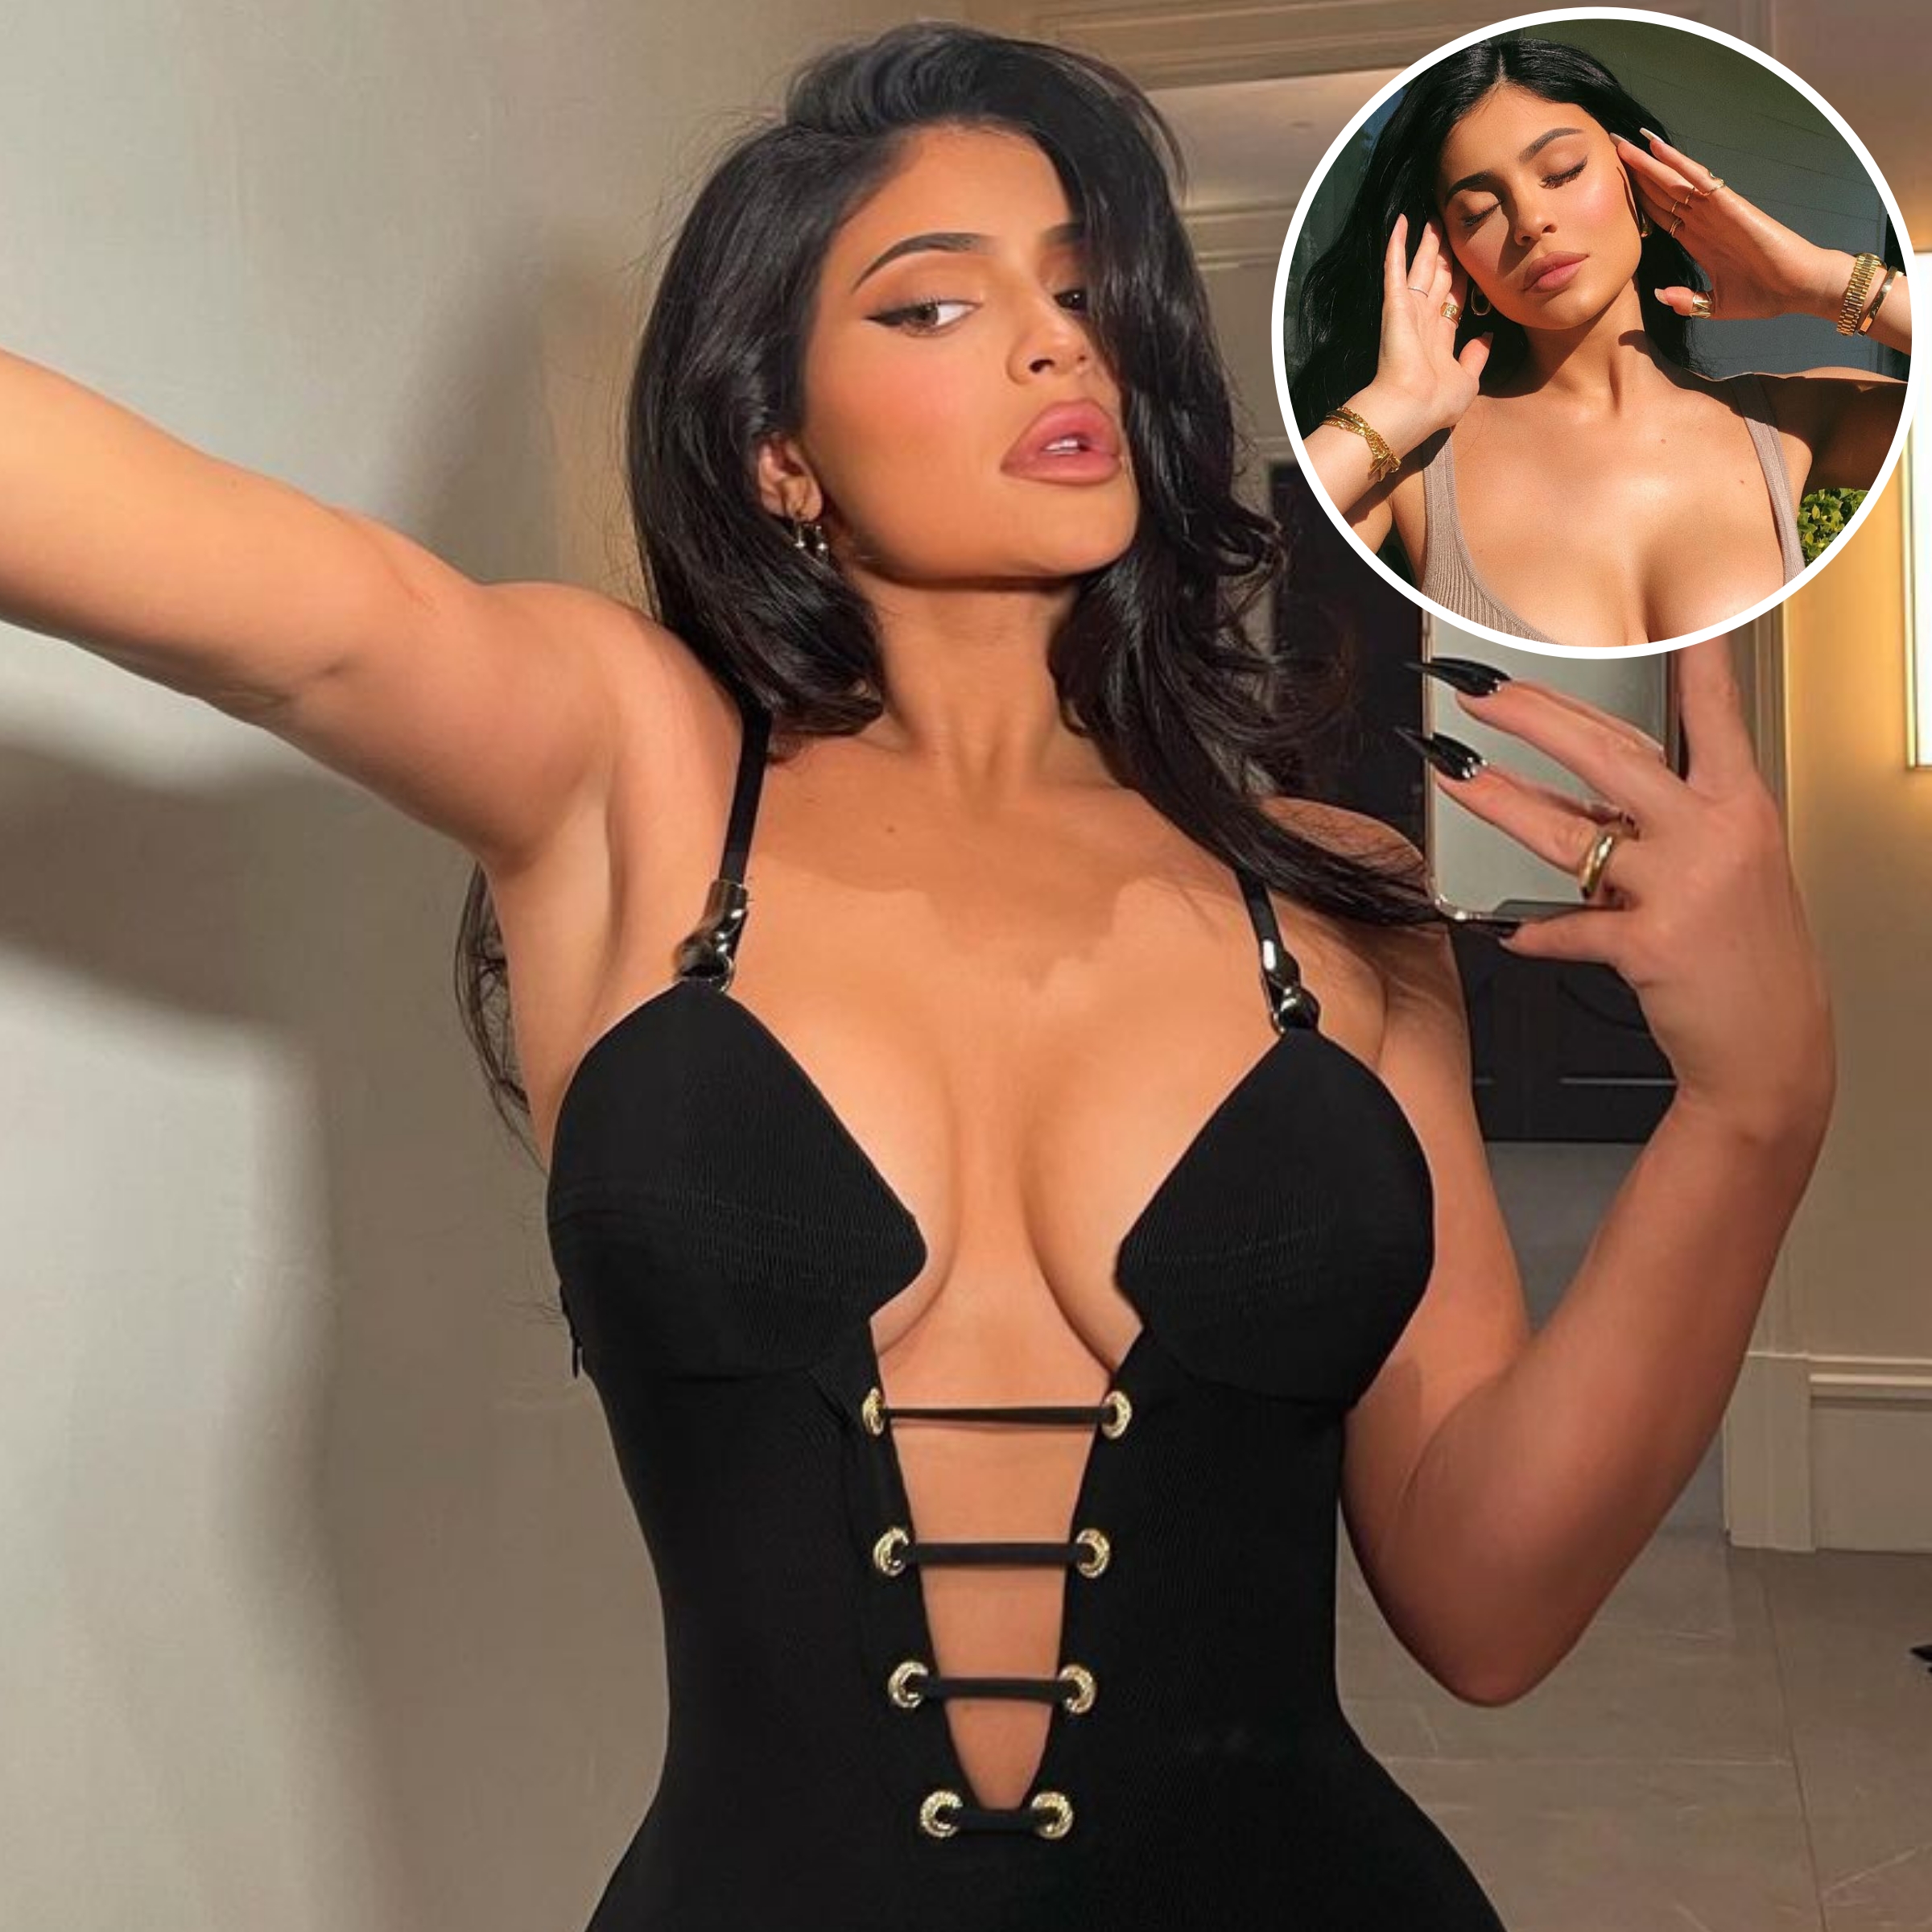 https://www.intouchweekly.com/wp-content/uploads/2021/07/Kylie-Jenner-Braless-Feature.jpeg?fit=2400%2C2400&quality=86&strip=all